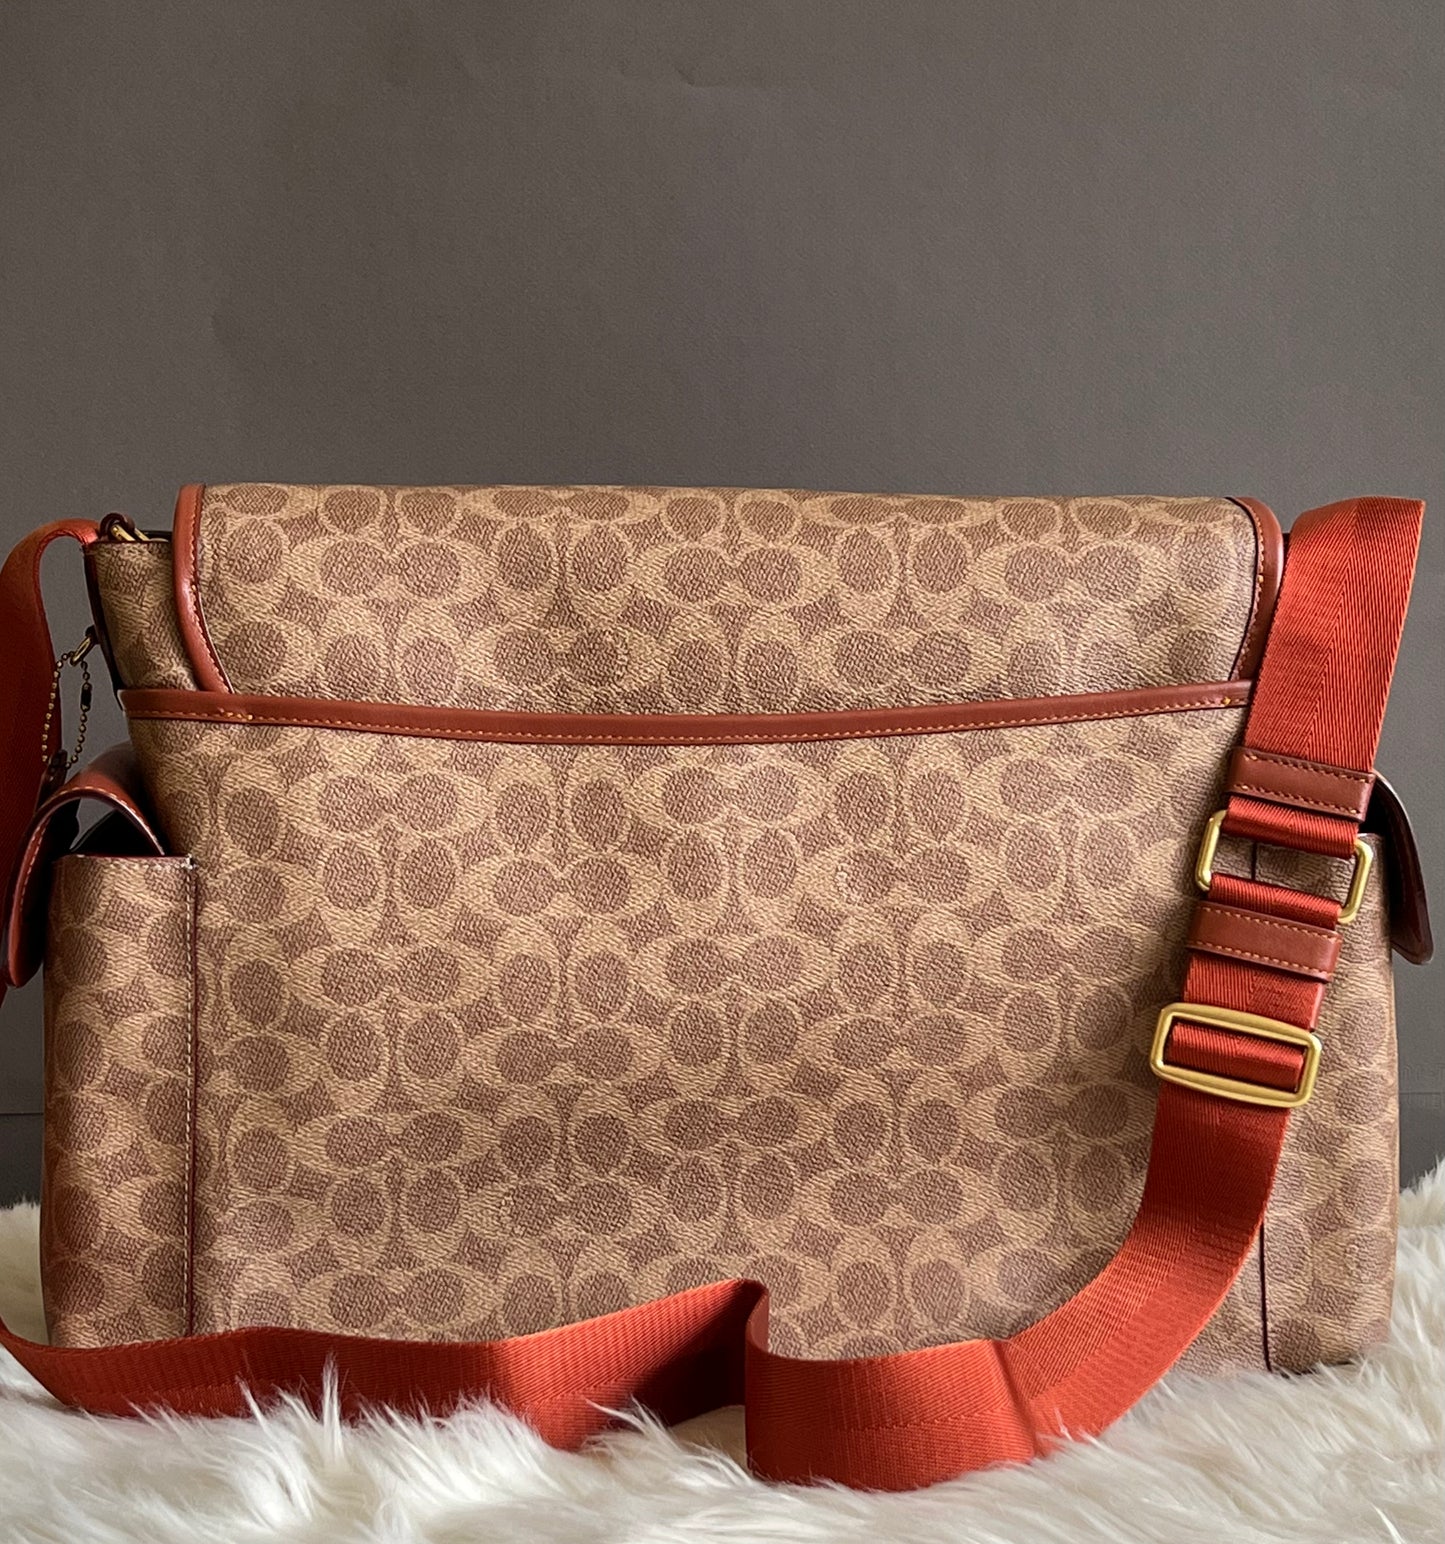 Coach Baby Messenger Bag in Signature Canvas